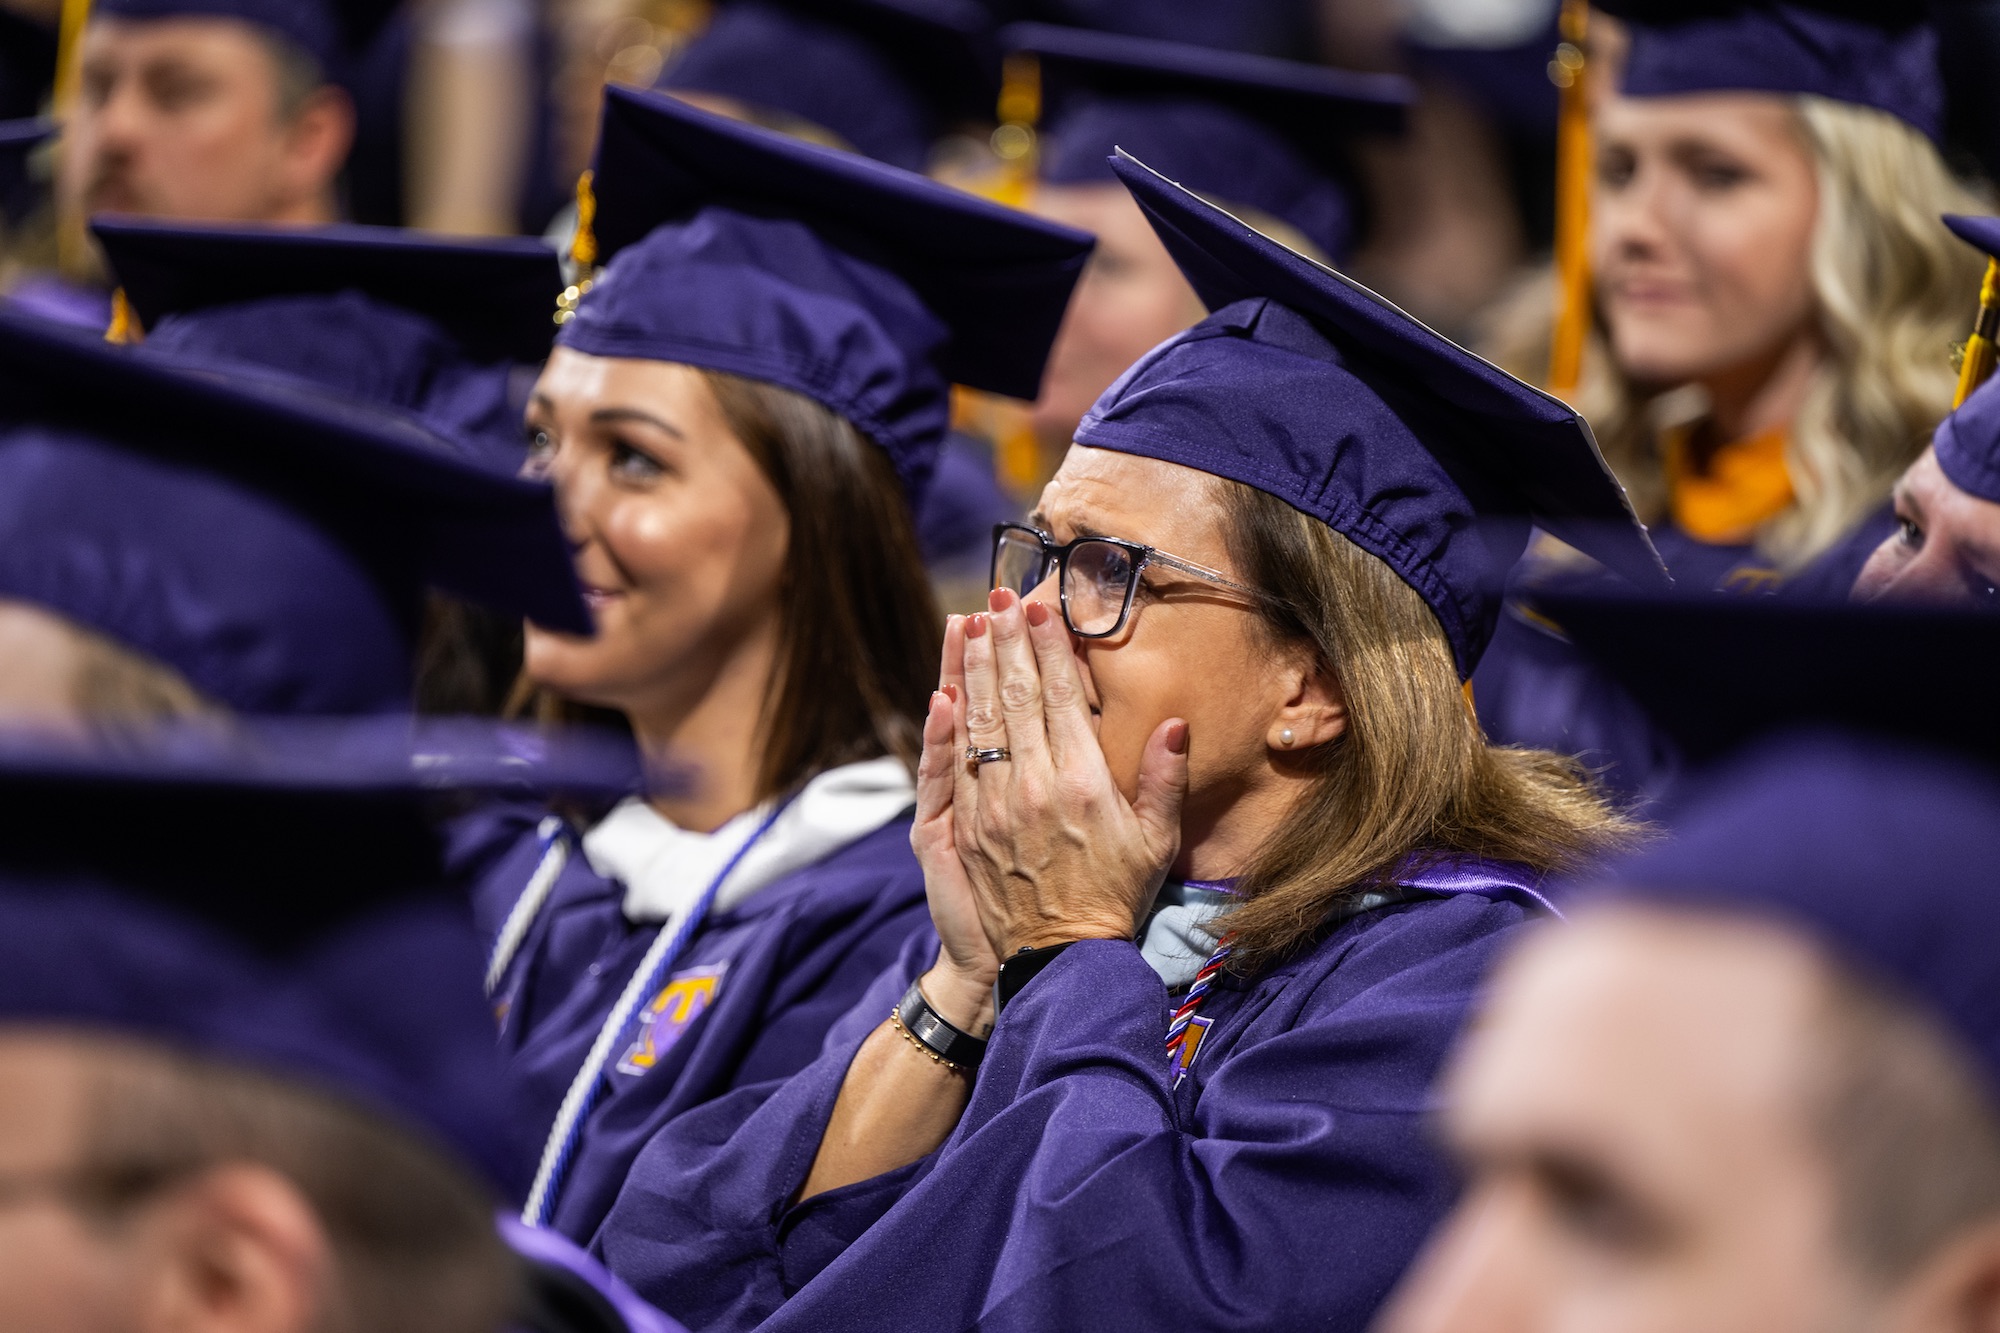 Jennifer Duggin, who graduated with her master's degree, reacts to a surprise video from her son, who is deployed in the U.S. Army.